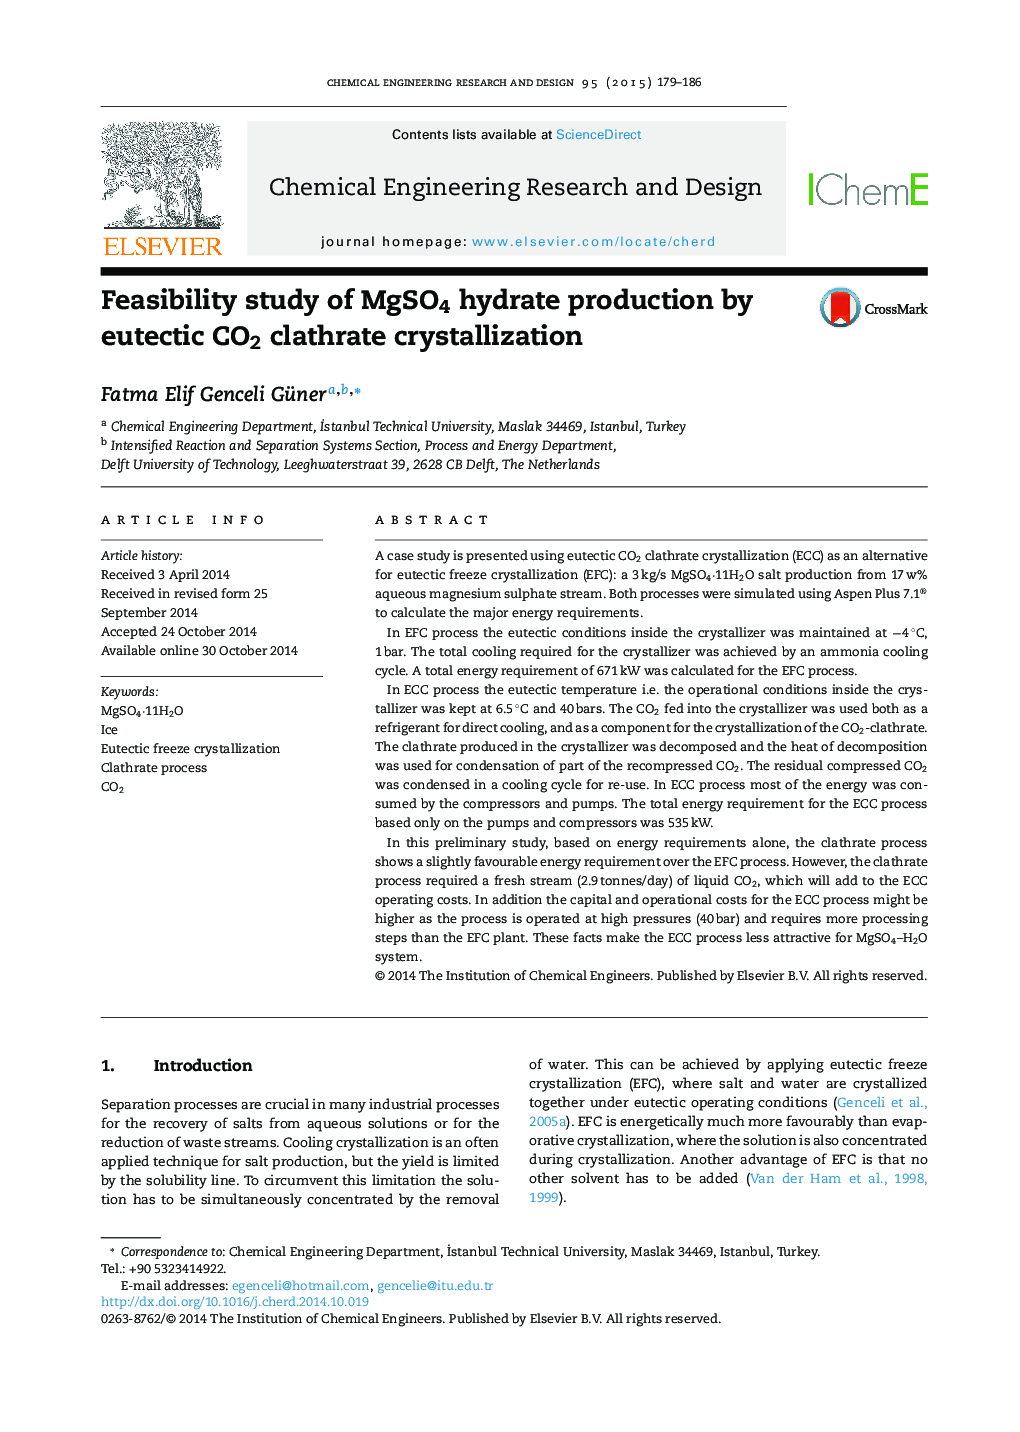 Feasibility study of MgSO4 hydrate production by eutectic CO2 clathrate crystallization